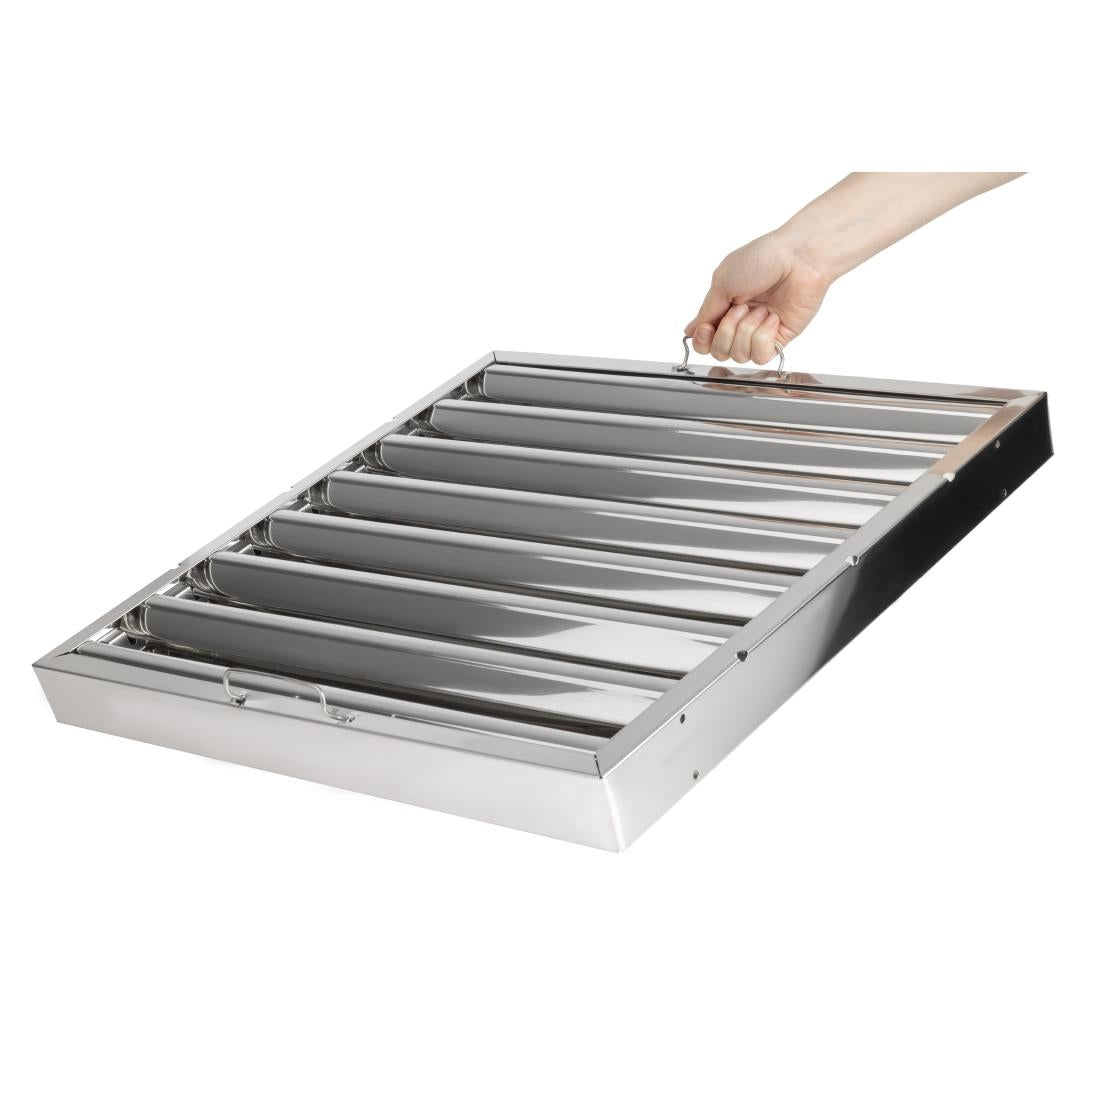 Kitchen Canopy Baffle Filter 495 x 495mm JD Catering Equipment Solutions Ltd